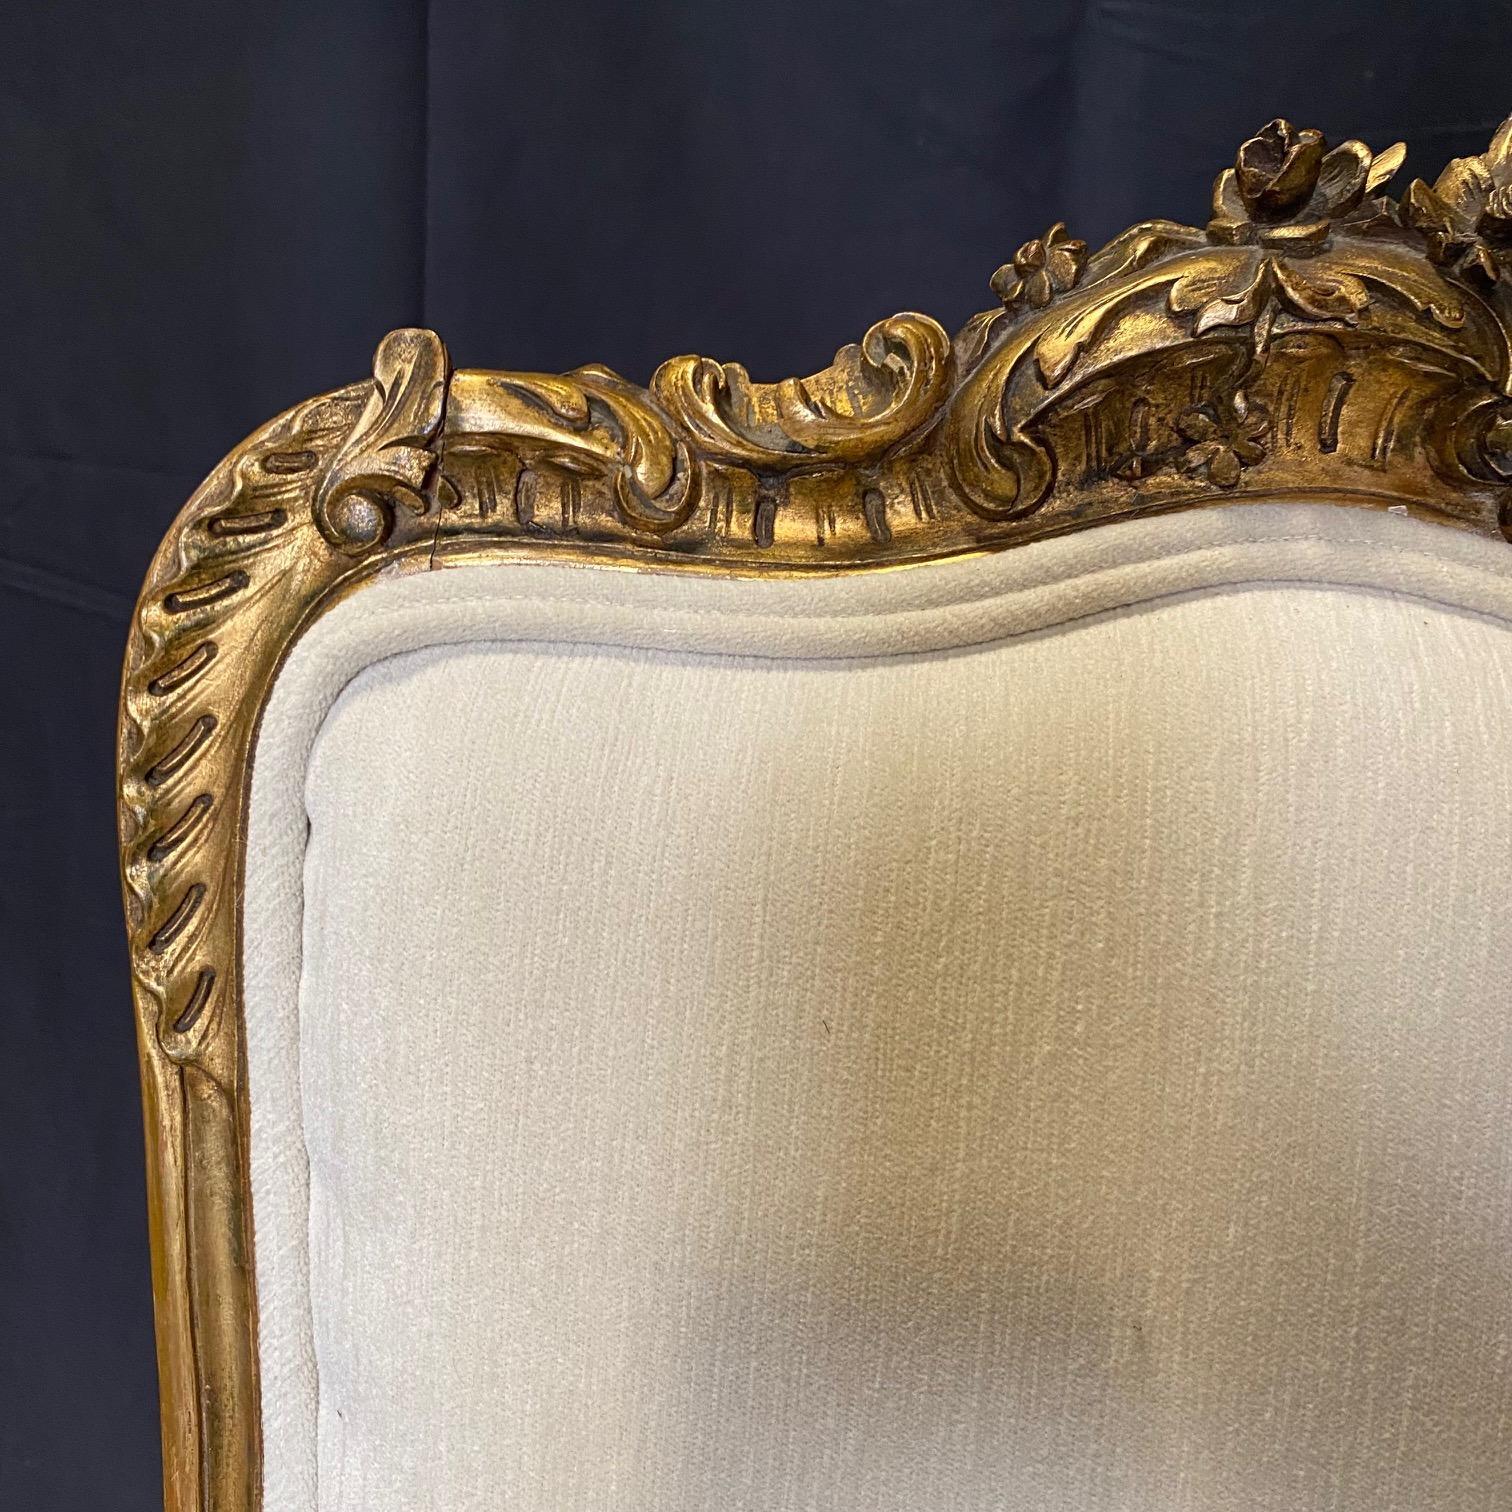  Pair of Antique French Louis XV Fauteuil Gilded Arm Chairs  1